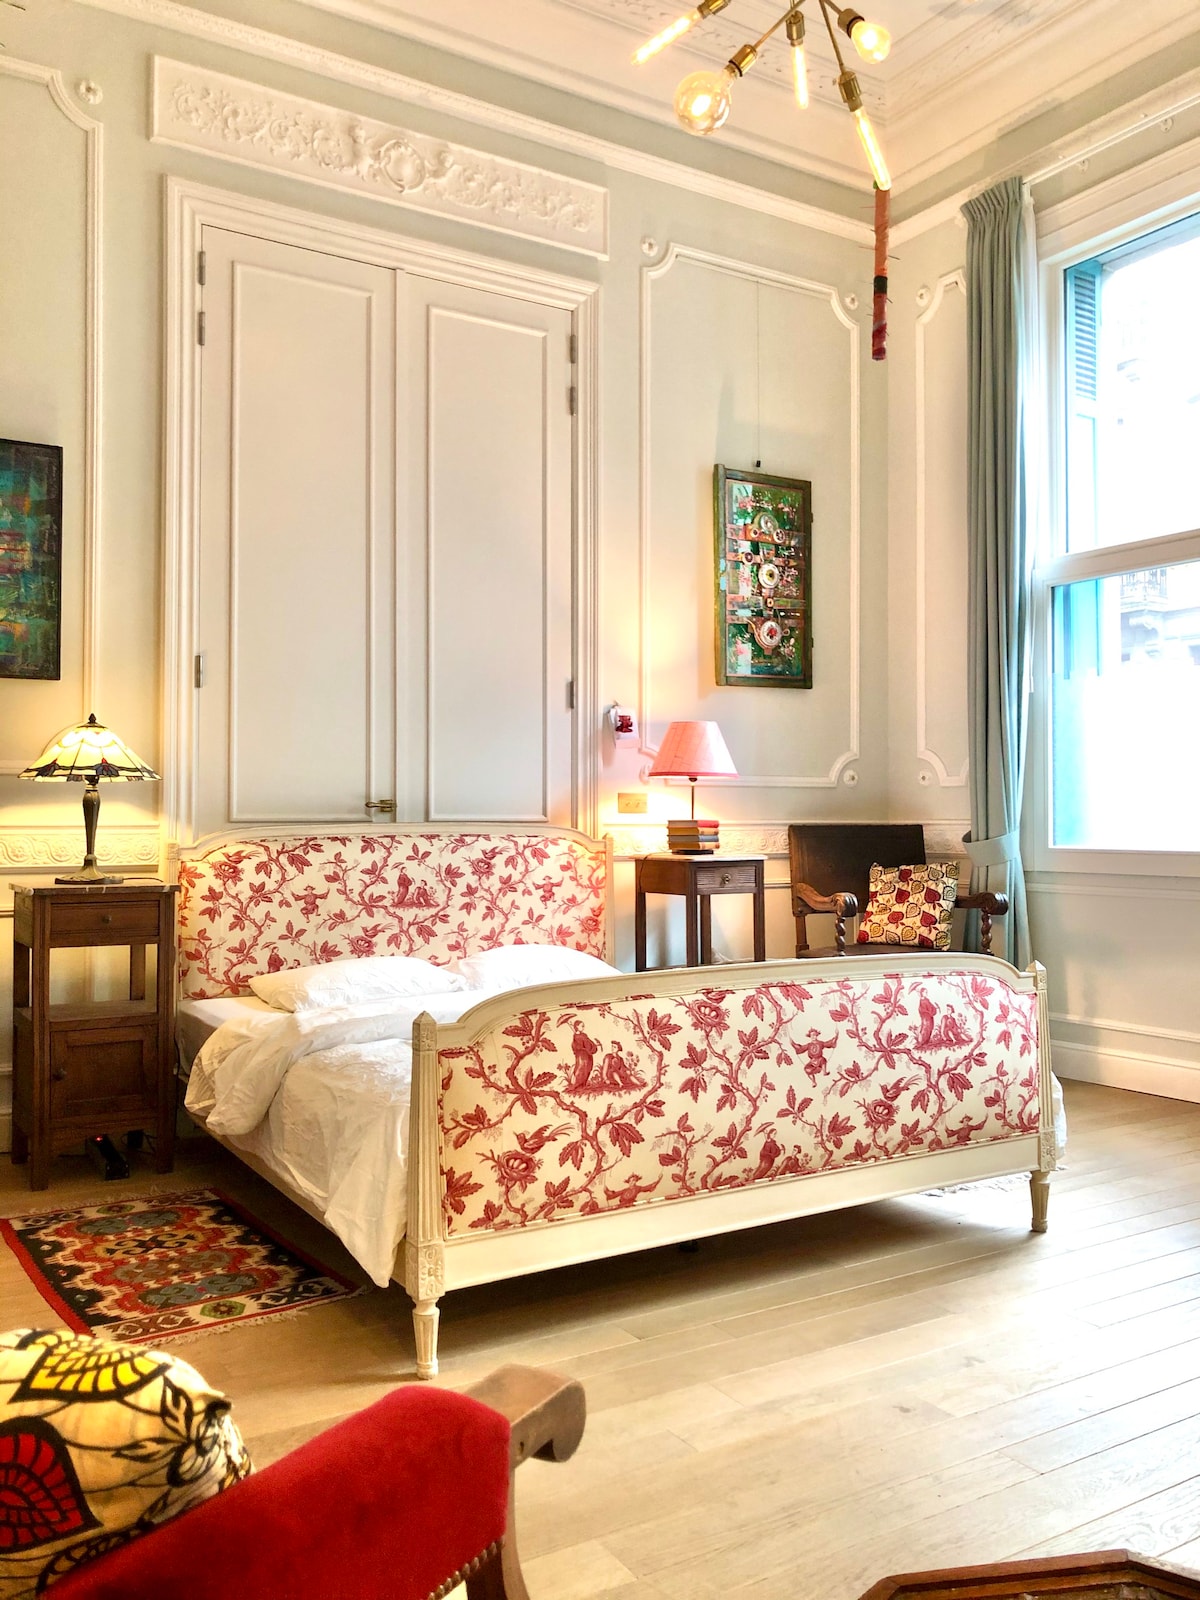 Brussels Furnished Monthly Rentals and Extended Stays | Airbnb